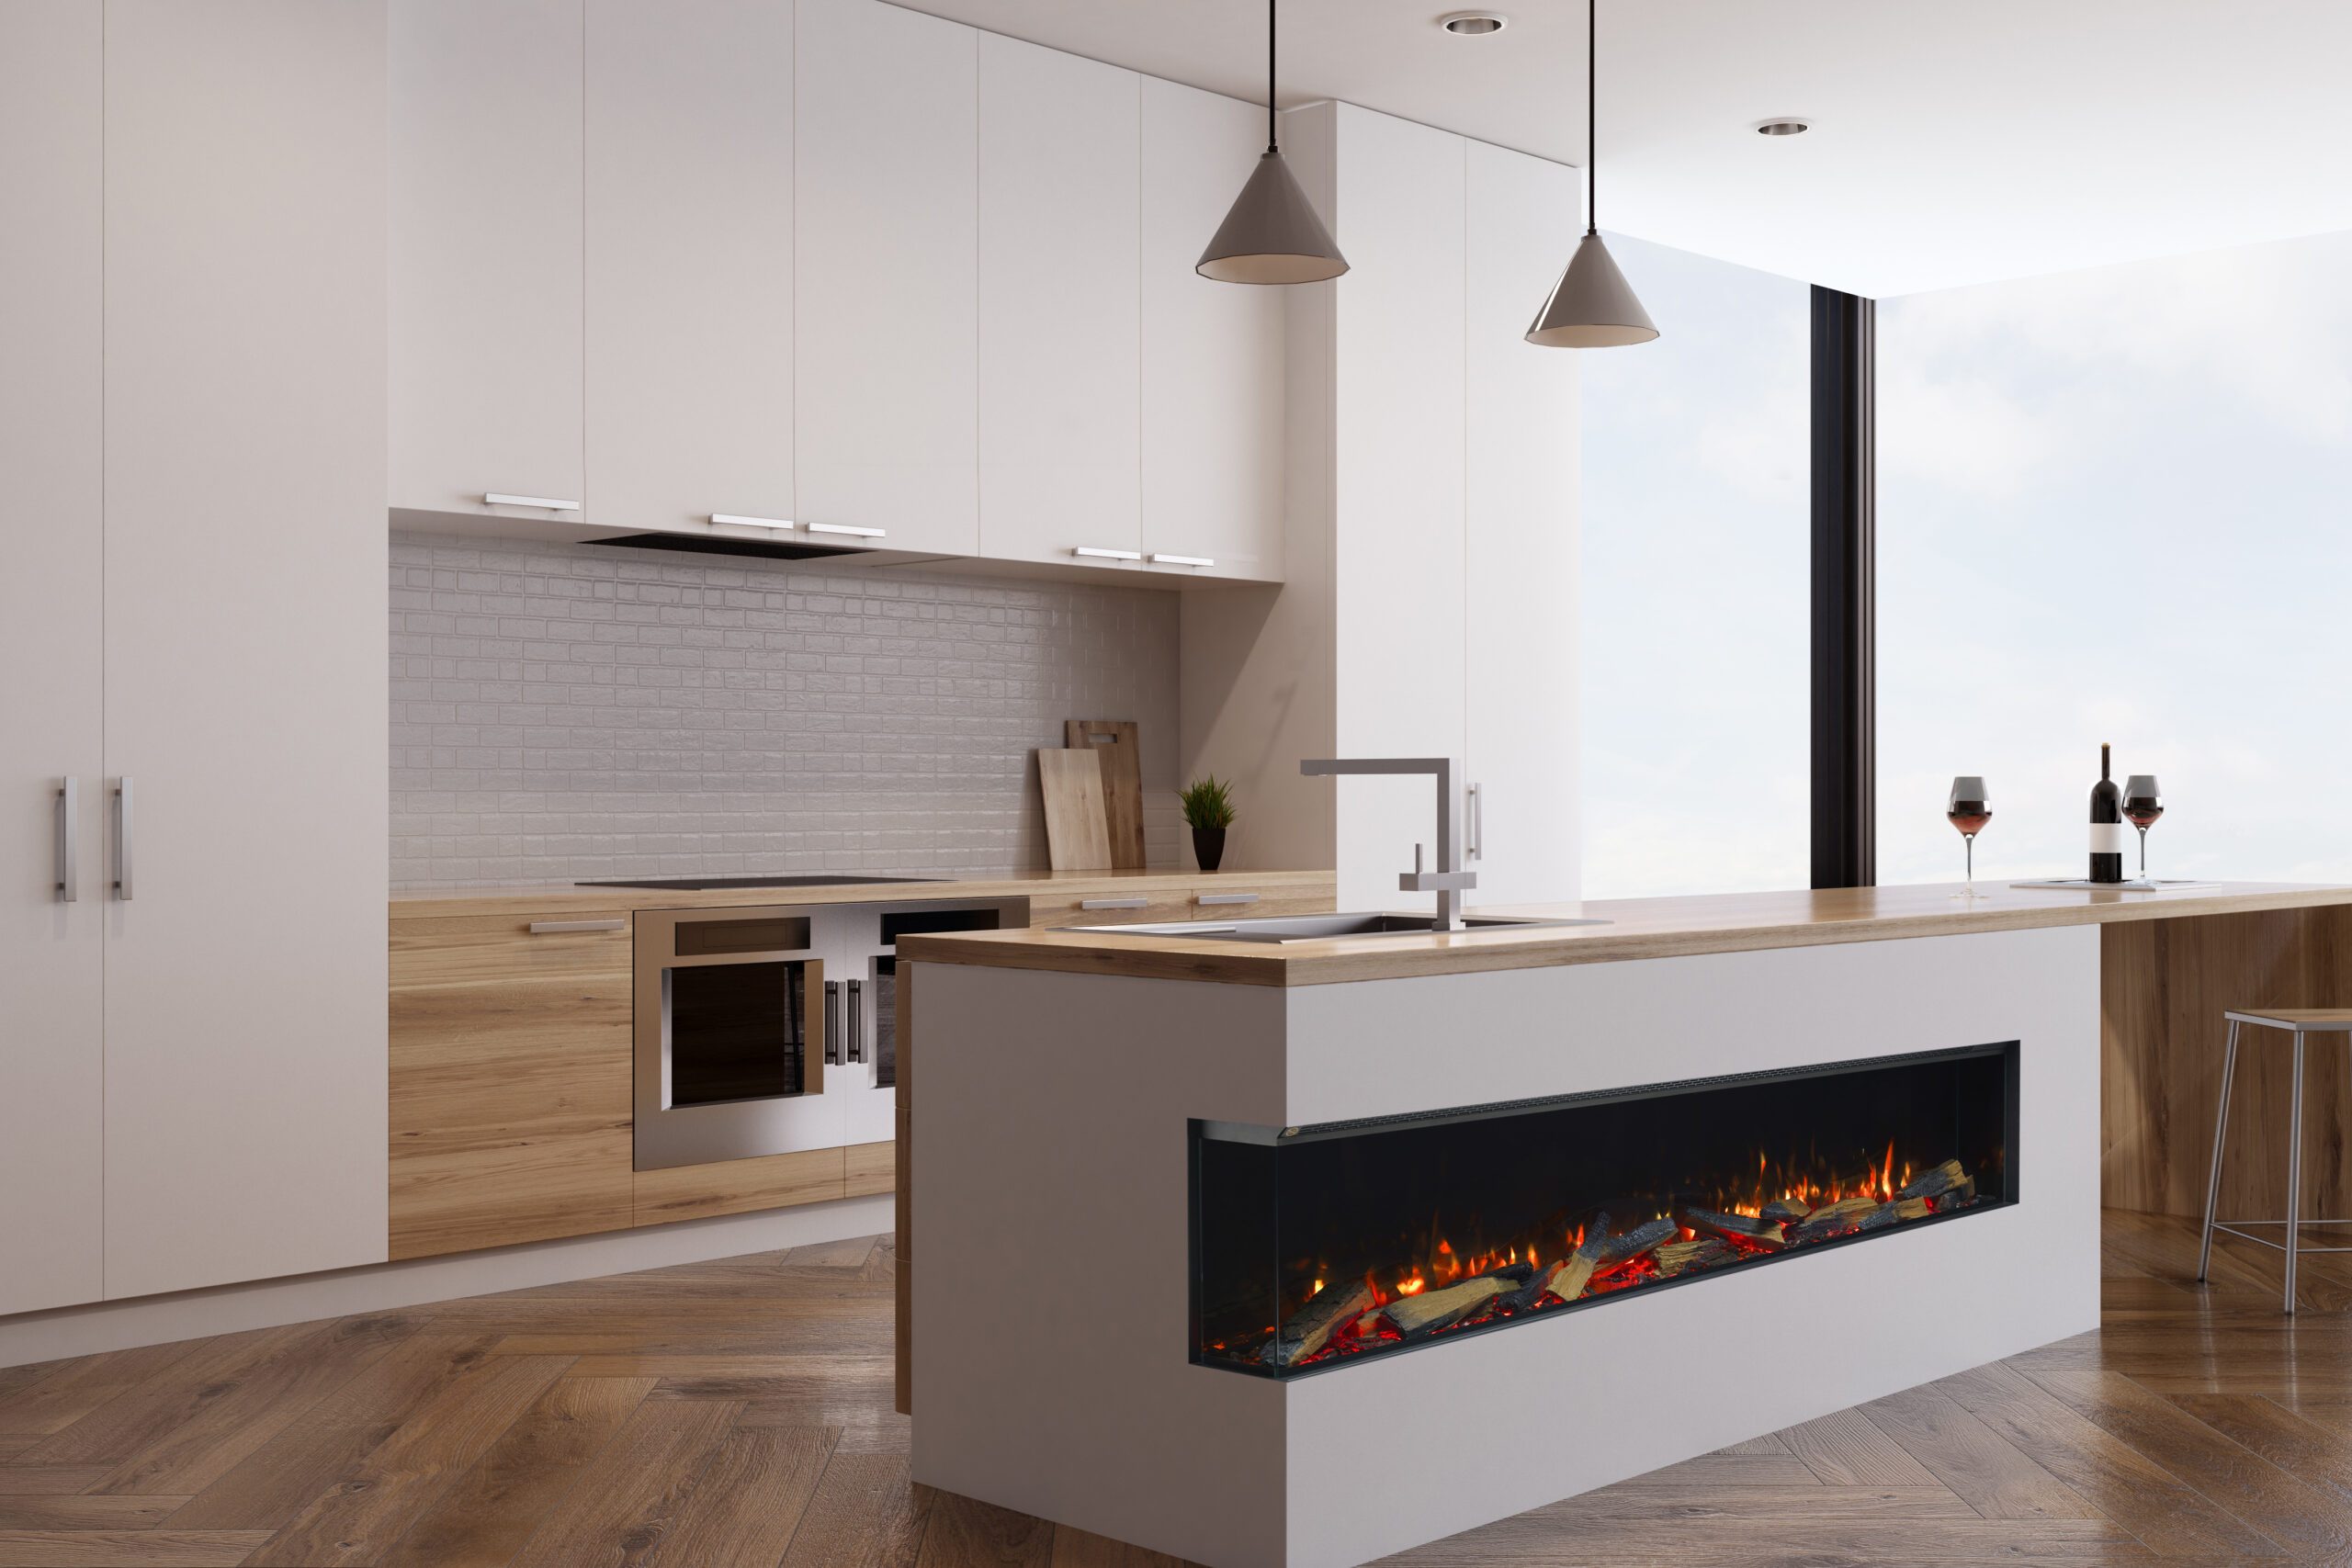 Side view of a kitchen interior with two ovens built in light wooden countertops and a bar. Panoramic window in the background. 3d rendering, mock up